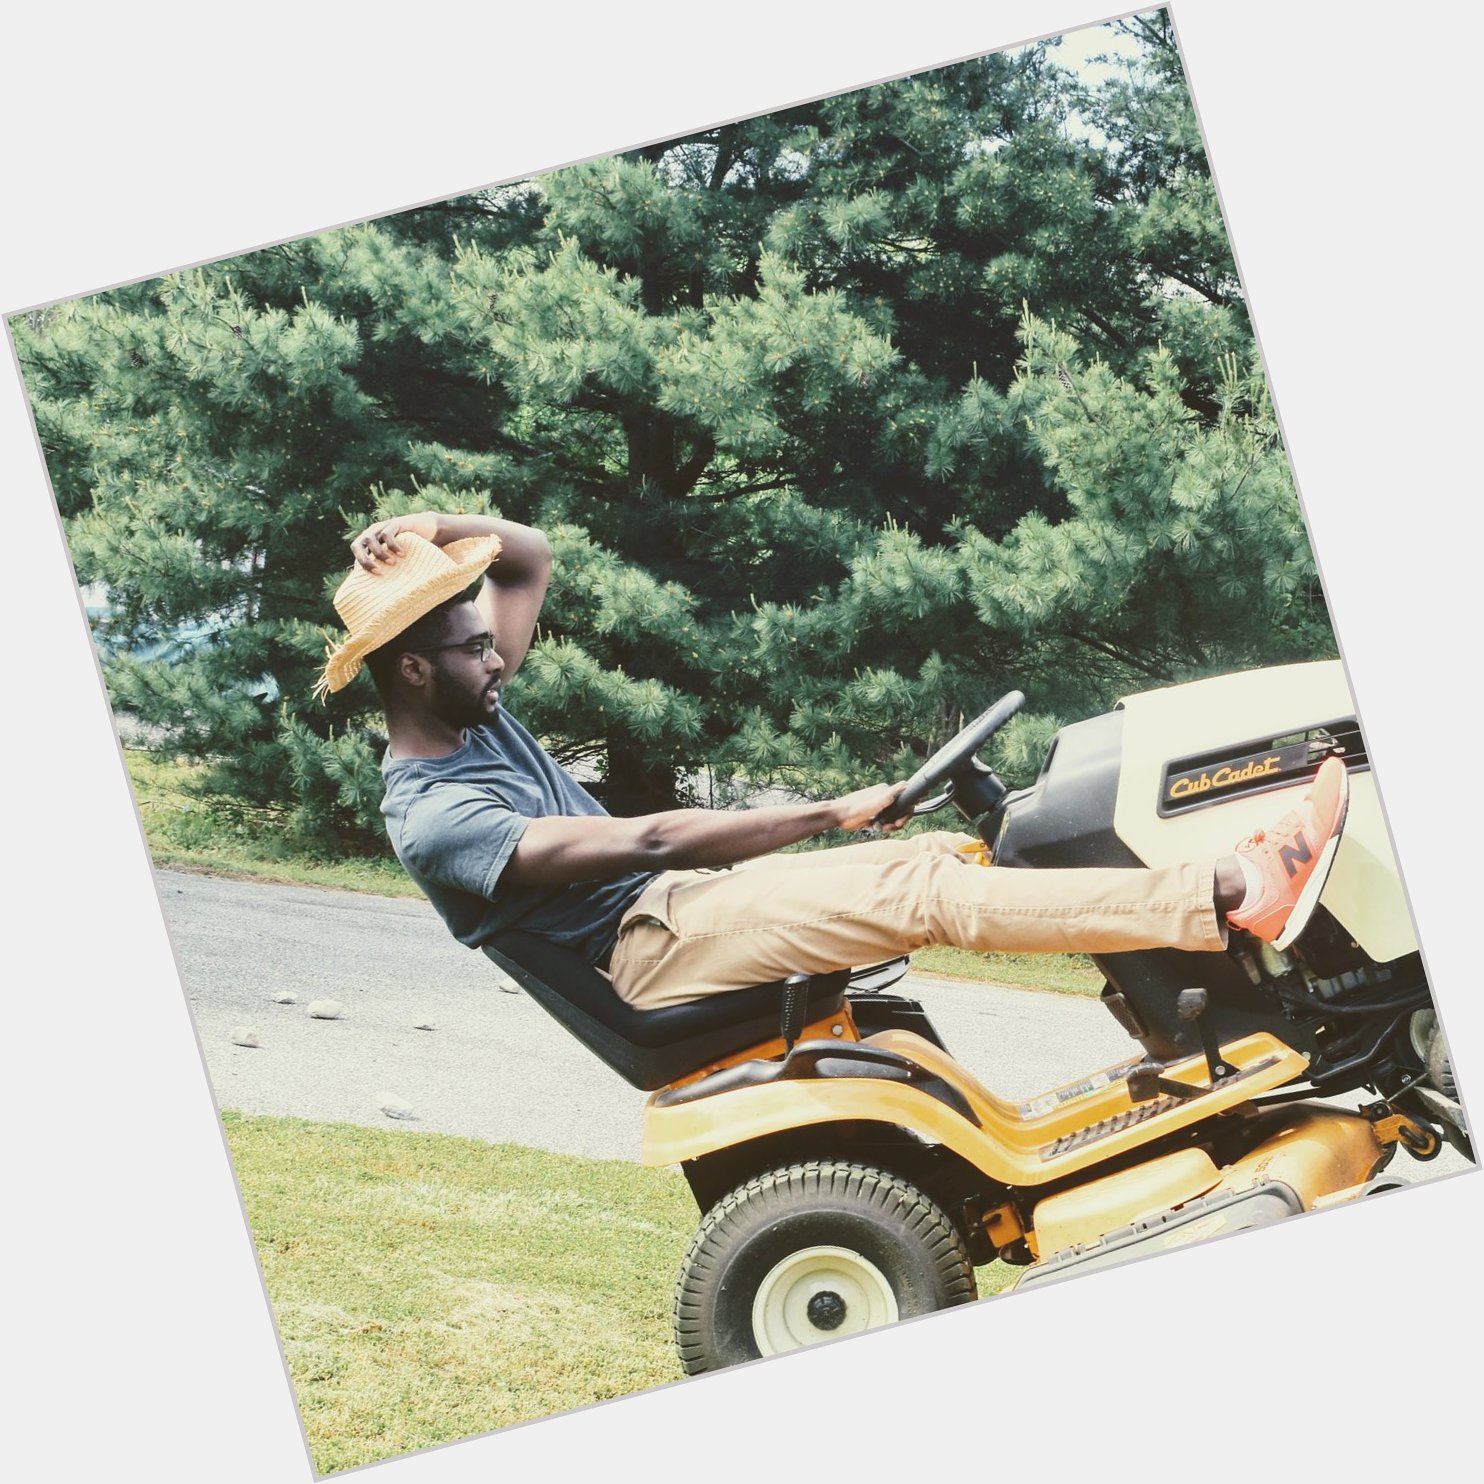 Happy Birthday, Meek Mill! Thank you for inspiring us country boys to pop wheelies too.  